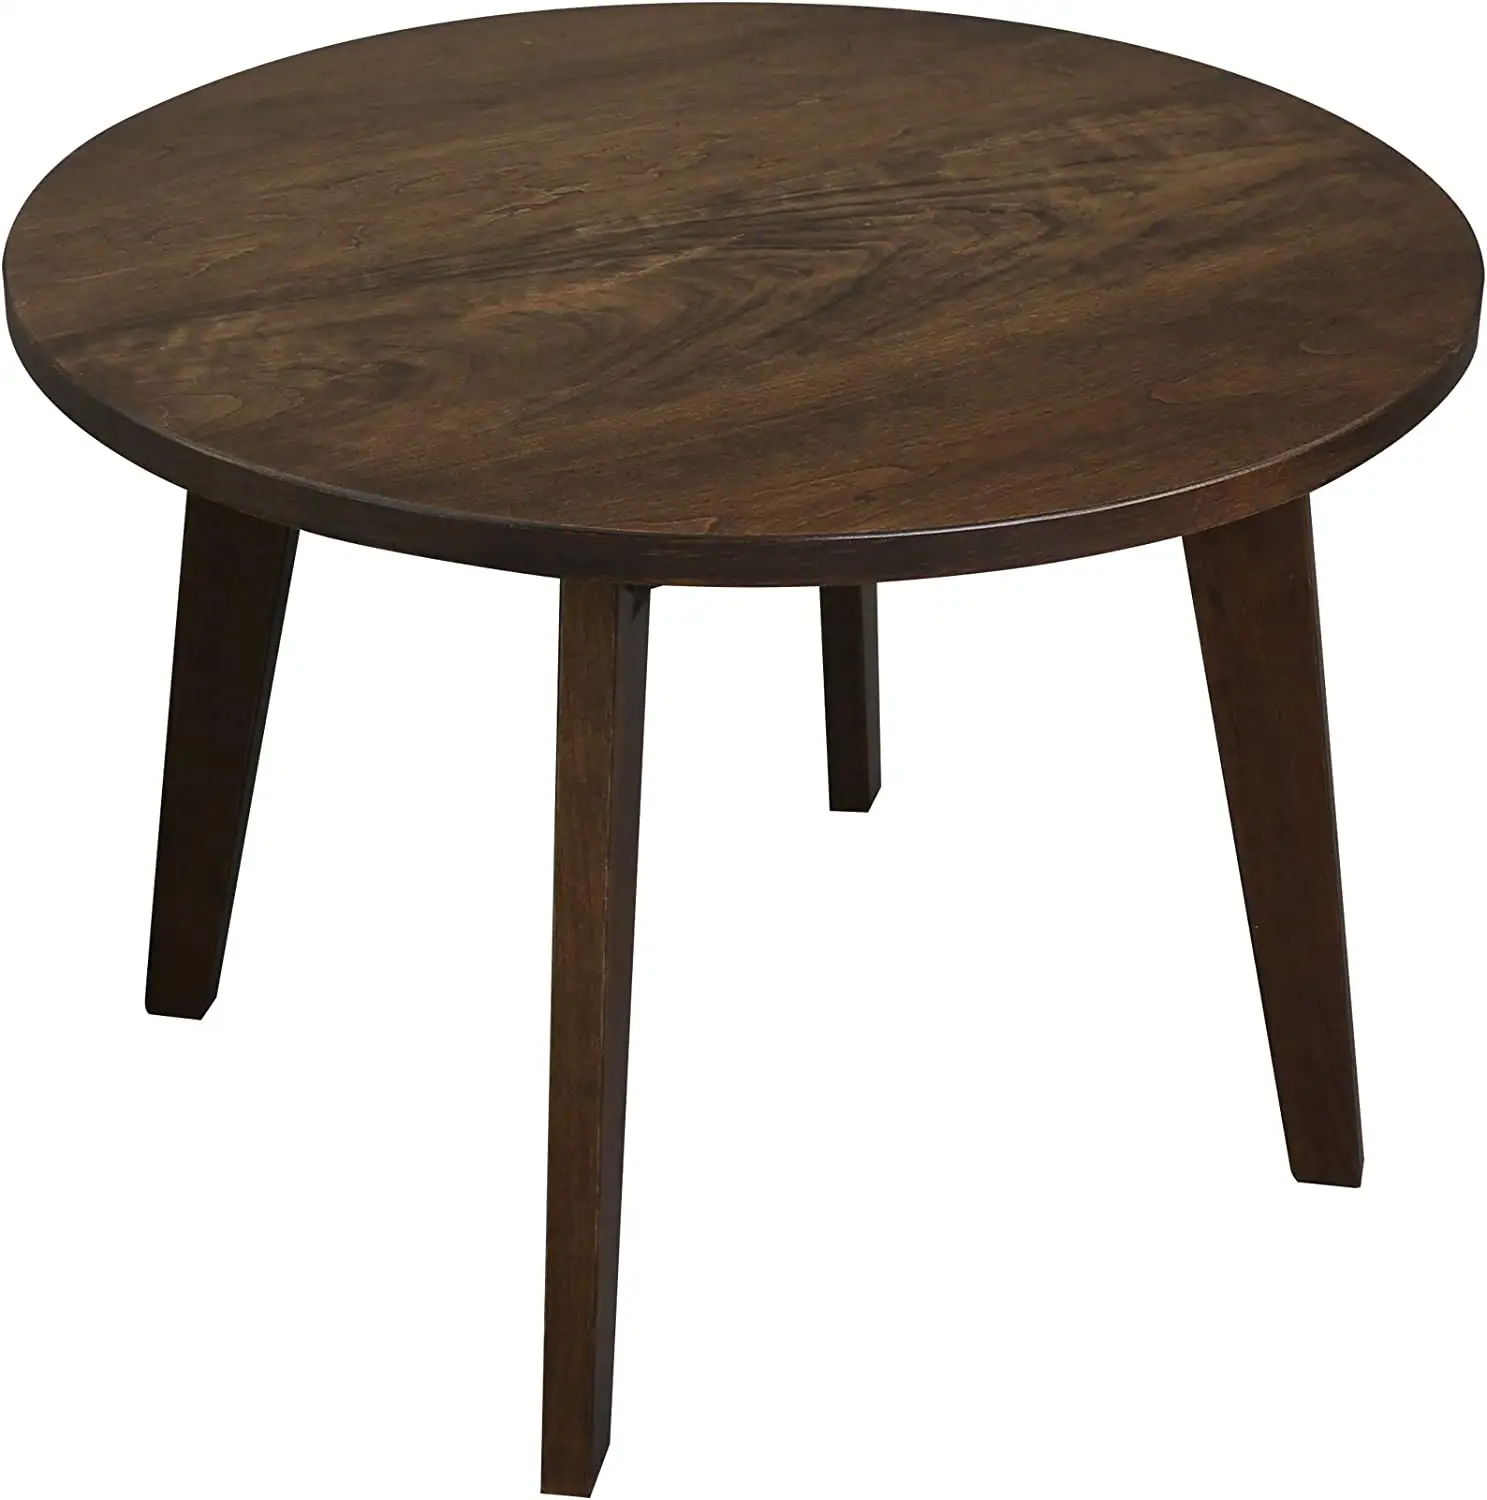 Dilun 24" Round Solid American Wood Coffee Table with Antique Cherry Finish